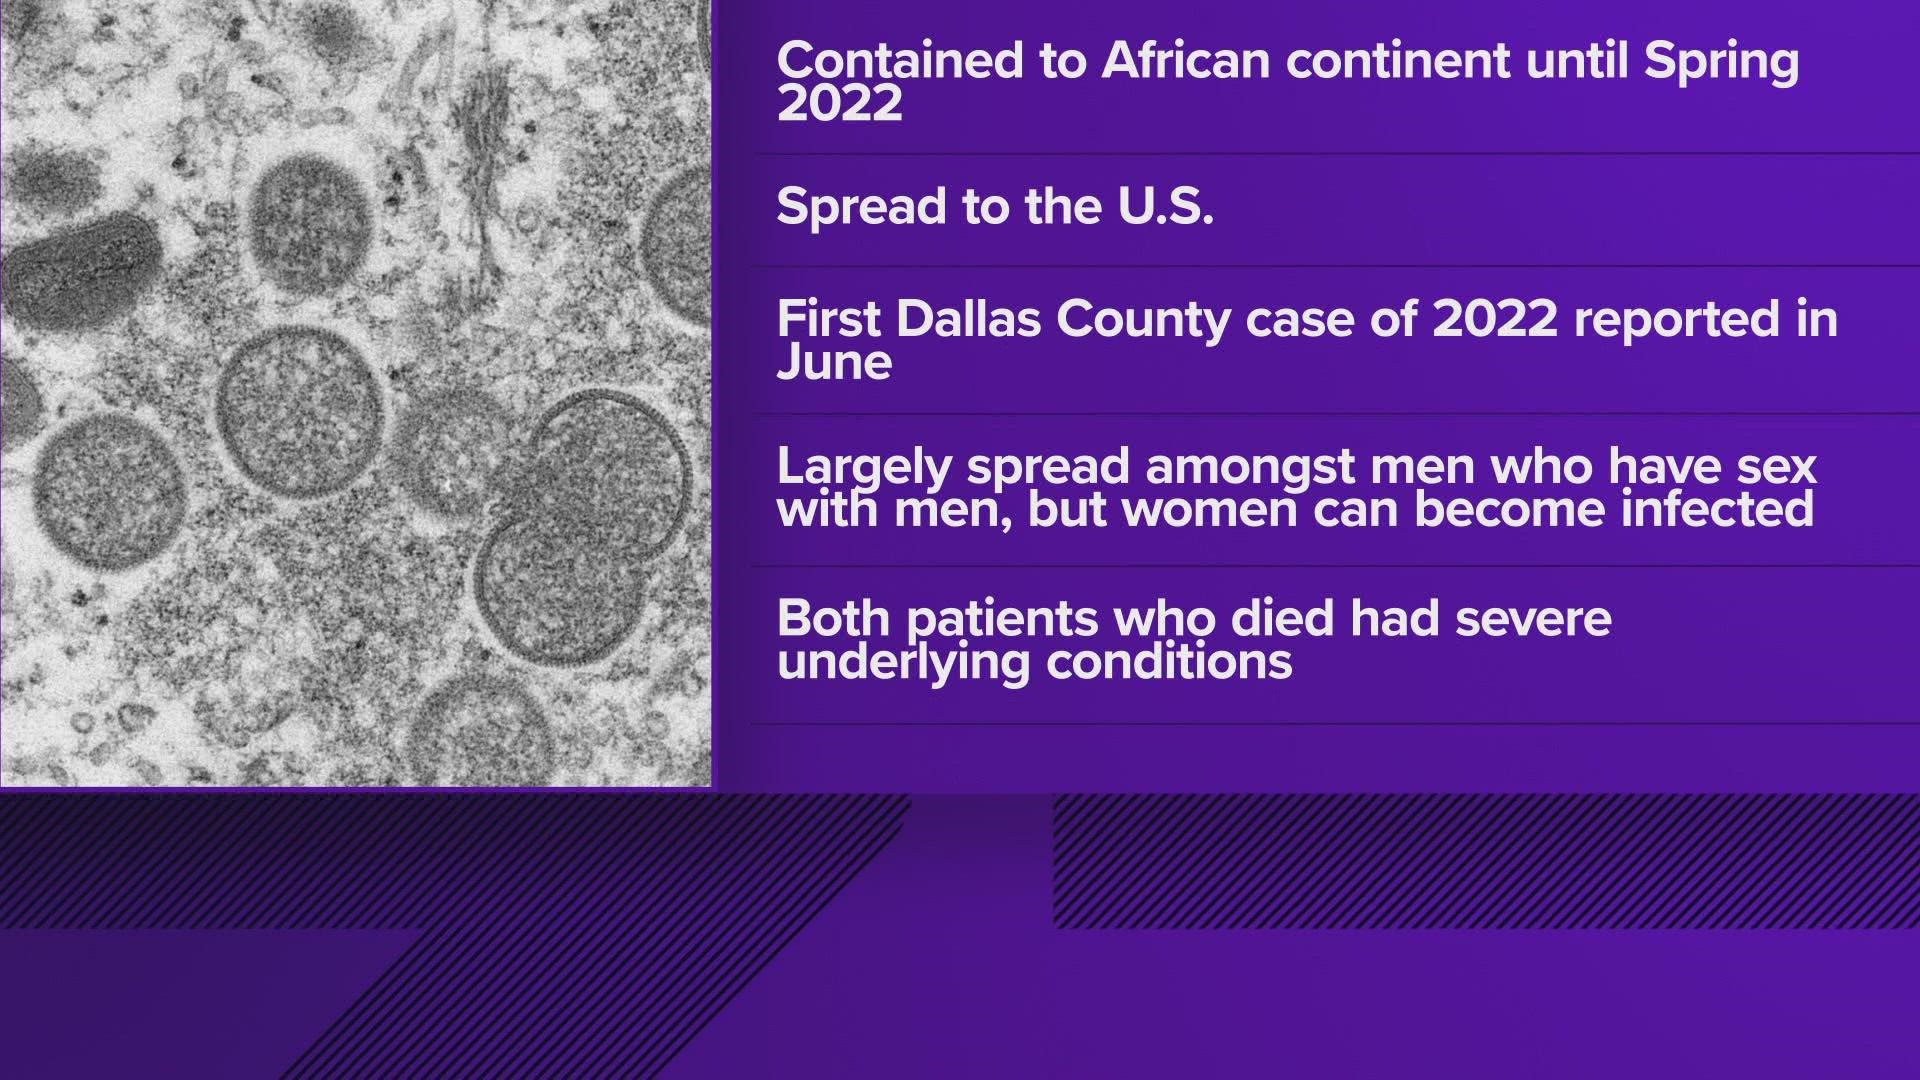 The Dallas County Medical Examiner's Office confirmed two men died related to Mpox in November and December.